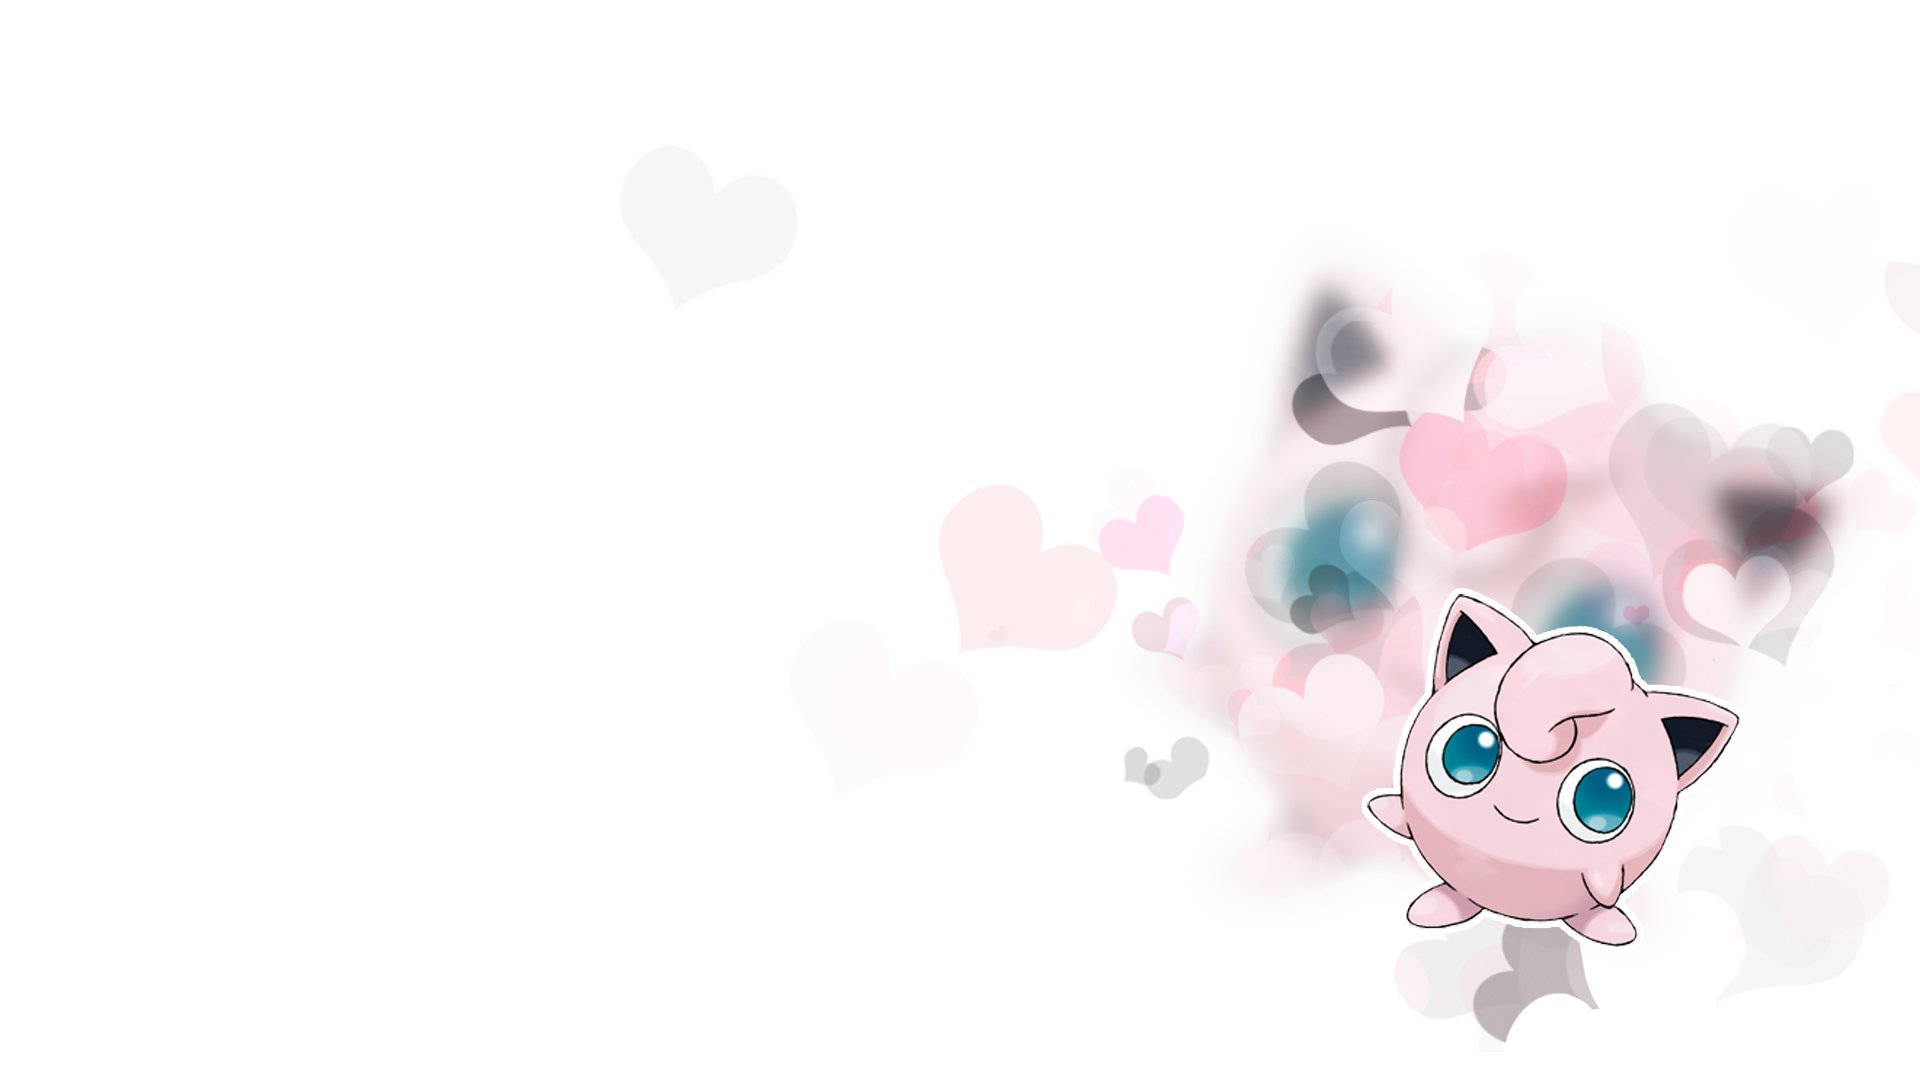 The Loveable Jigglypuff Background